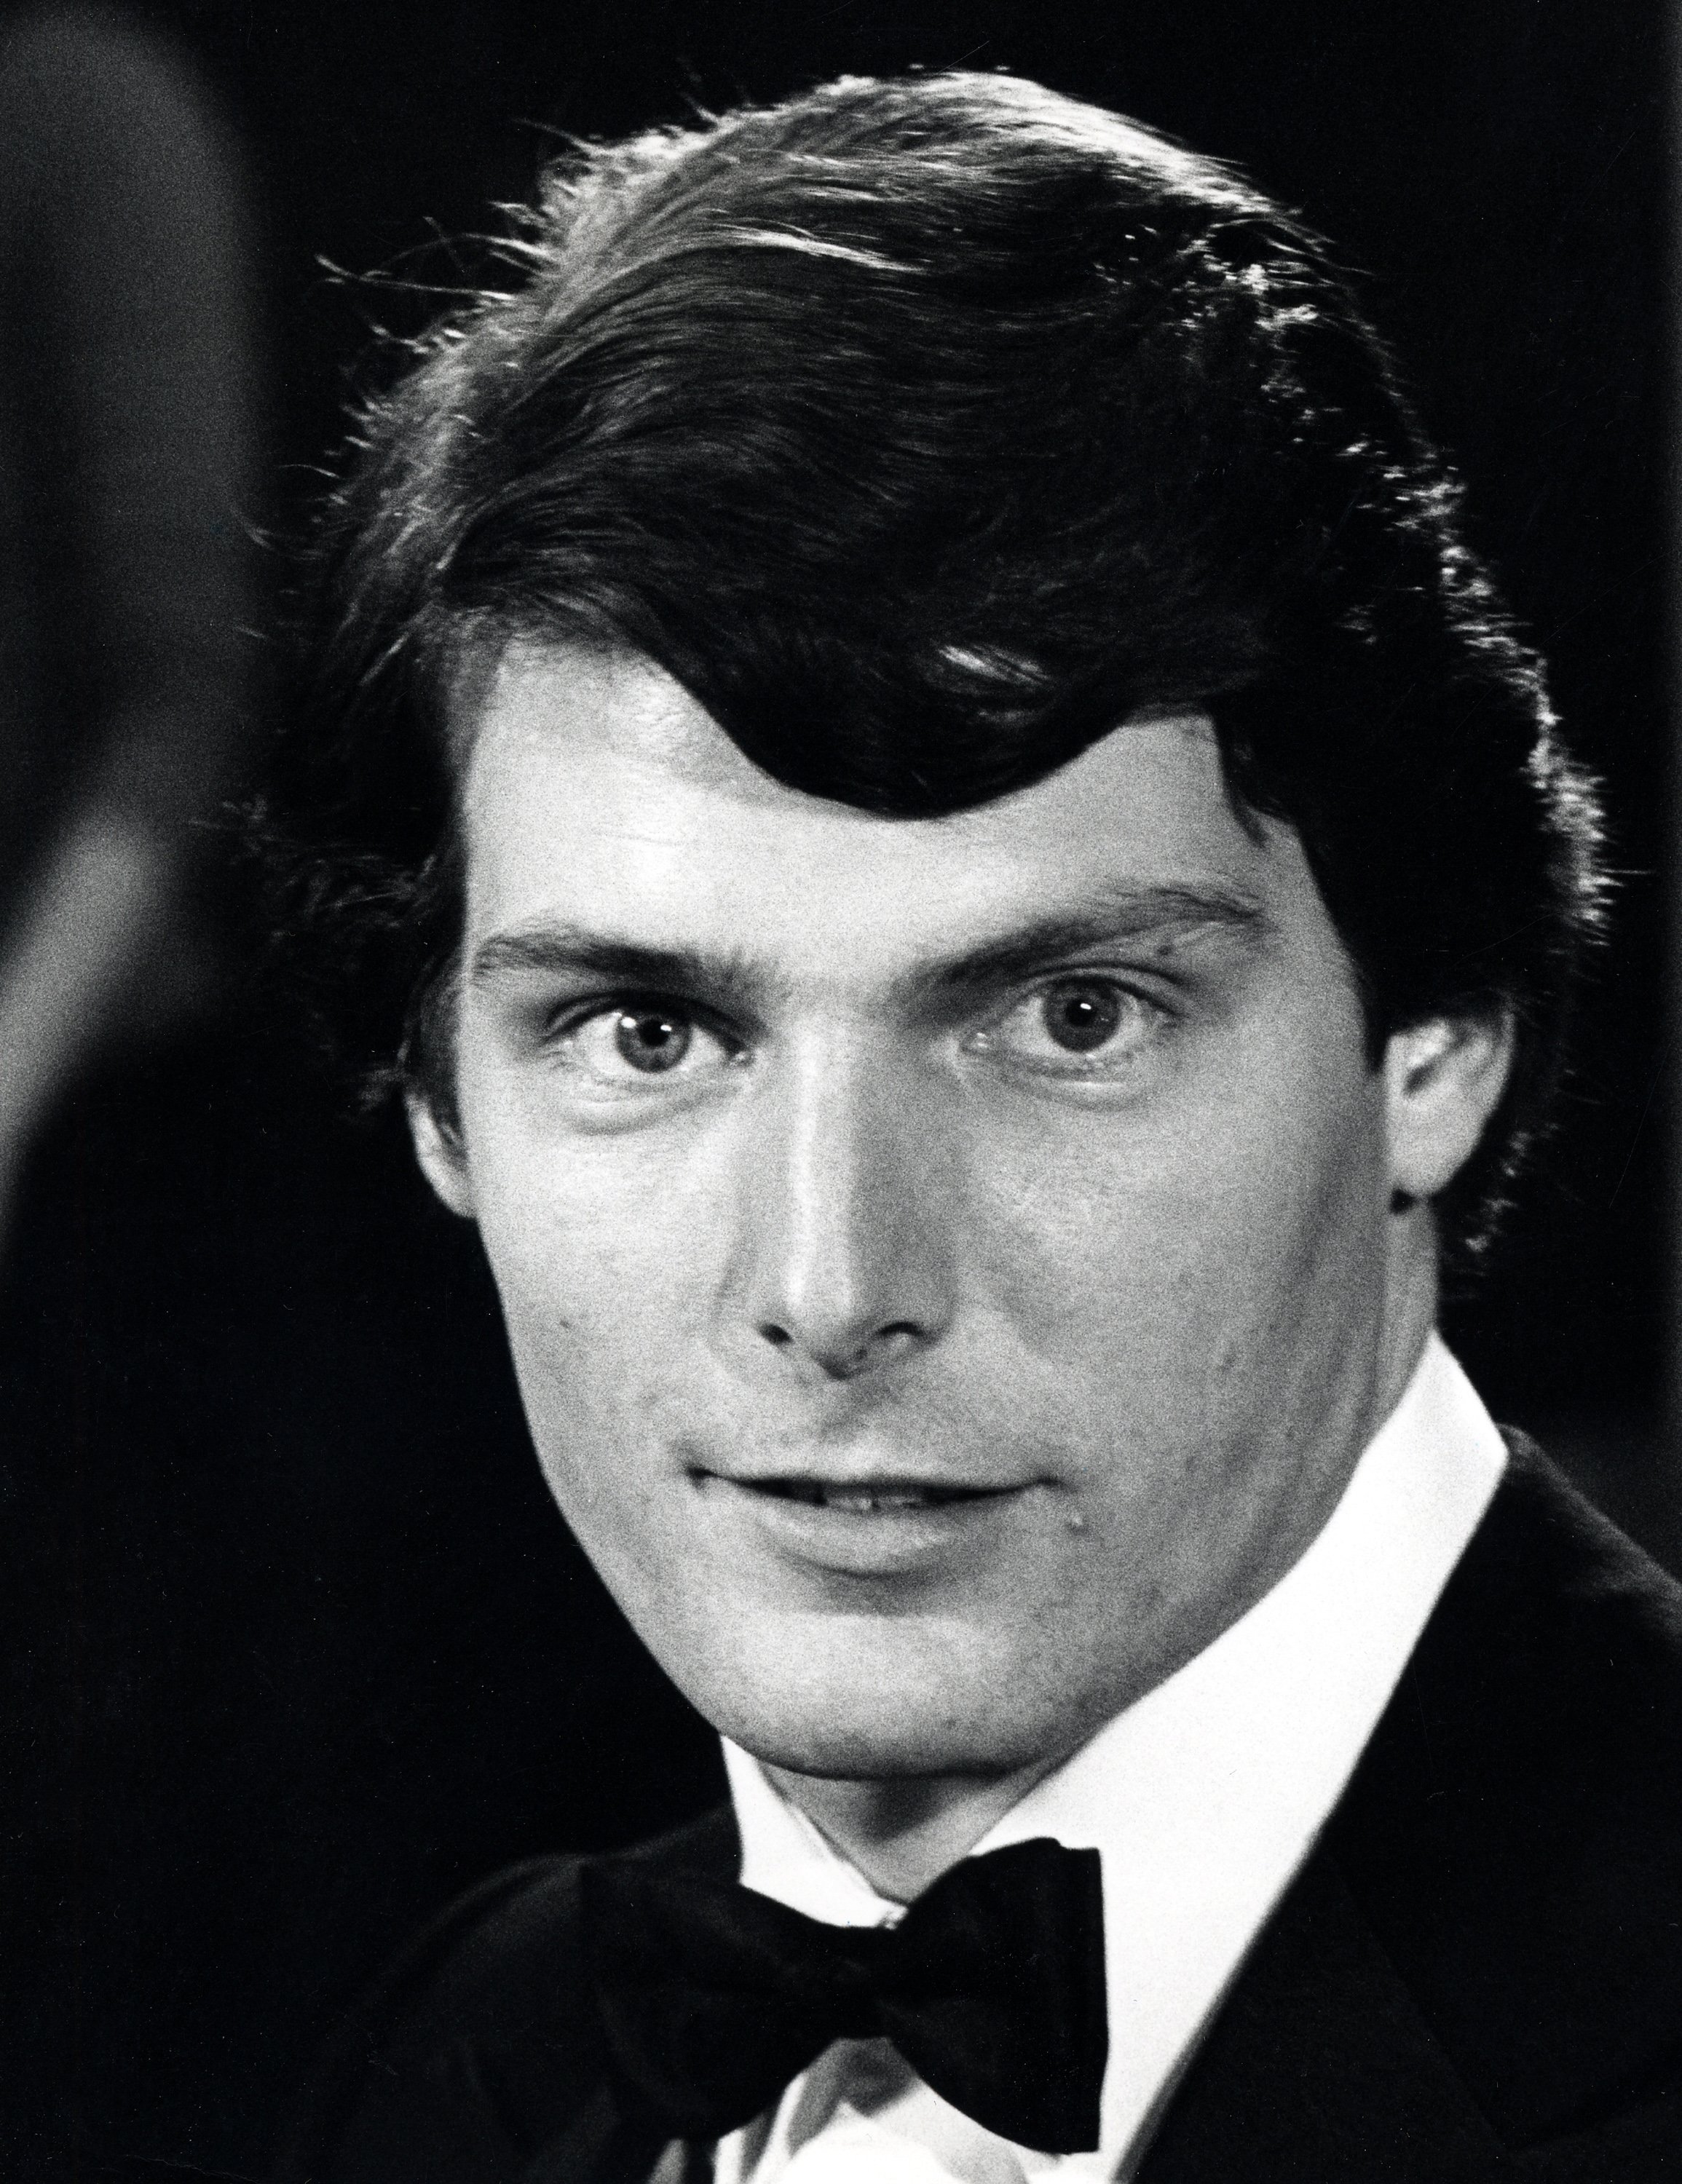 Christopher Reeve during Presidential Premiere of "Superman" in Washington, D.C. - December 10, 1978 at JFK Center for the Performing Arts, Eisenhower Theater in Washington, D.C., United States | Source: Getty Images